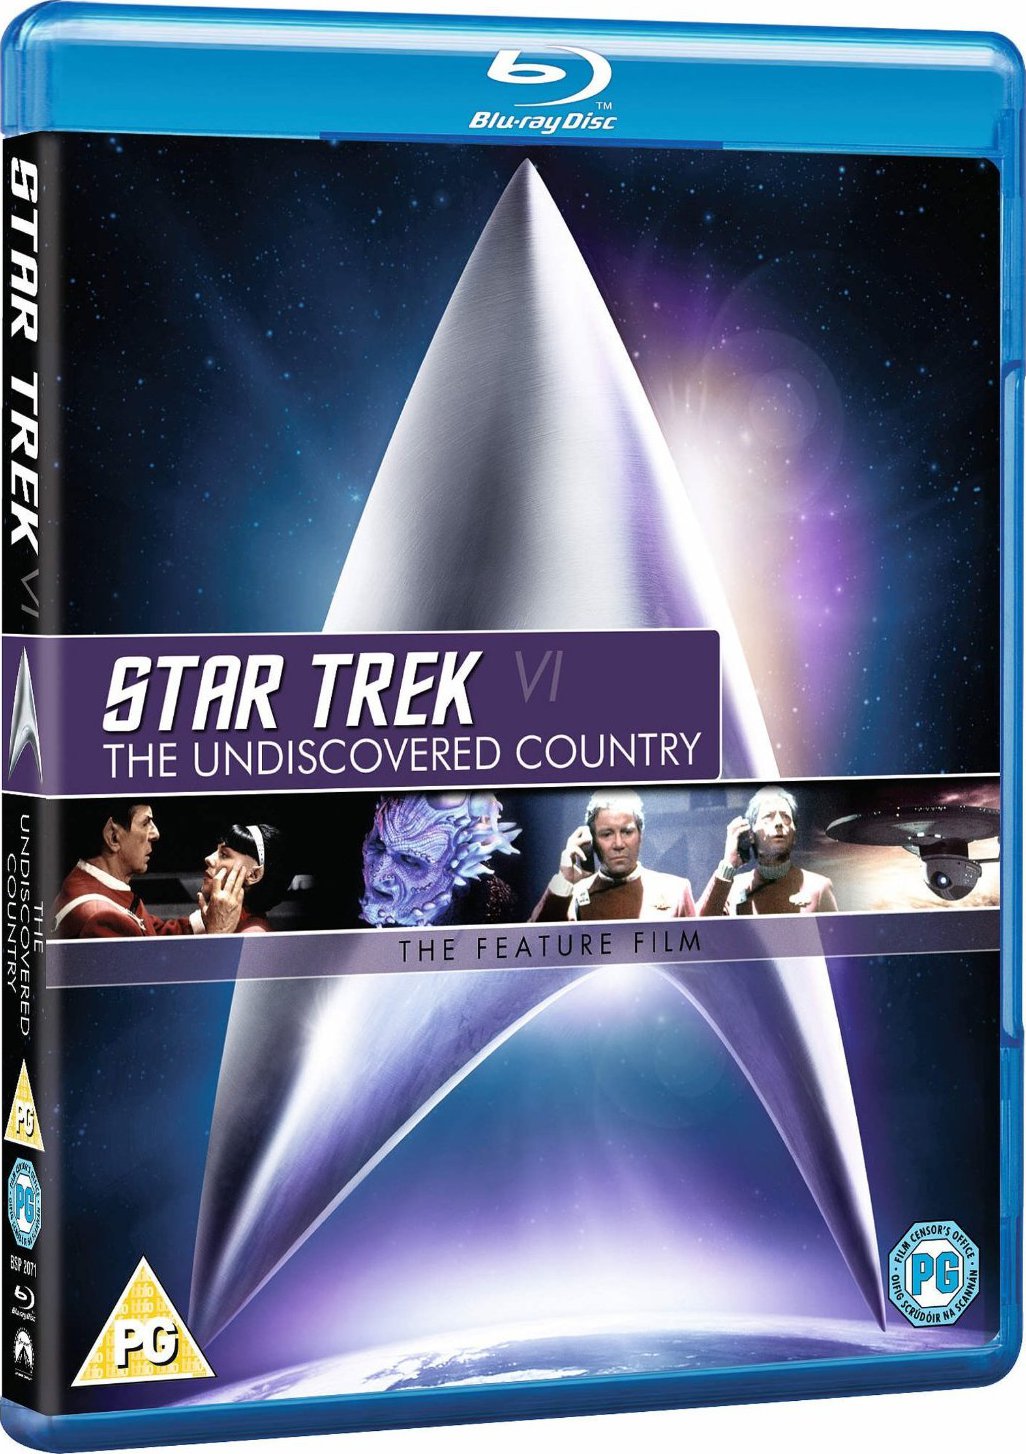 Star Trek VI : The Undiscovered Country #26